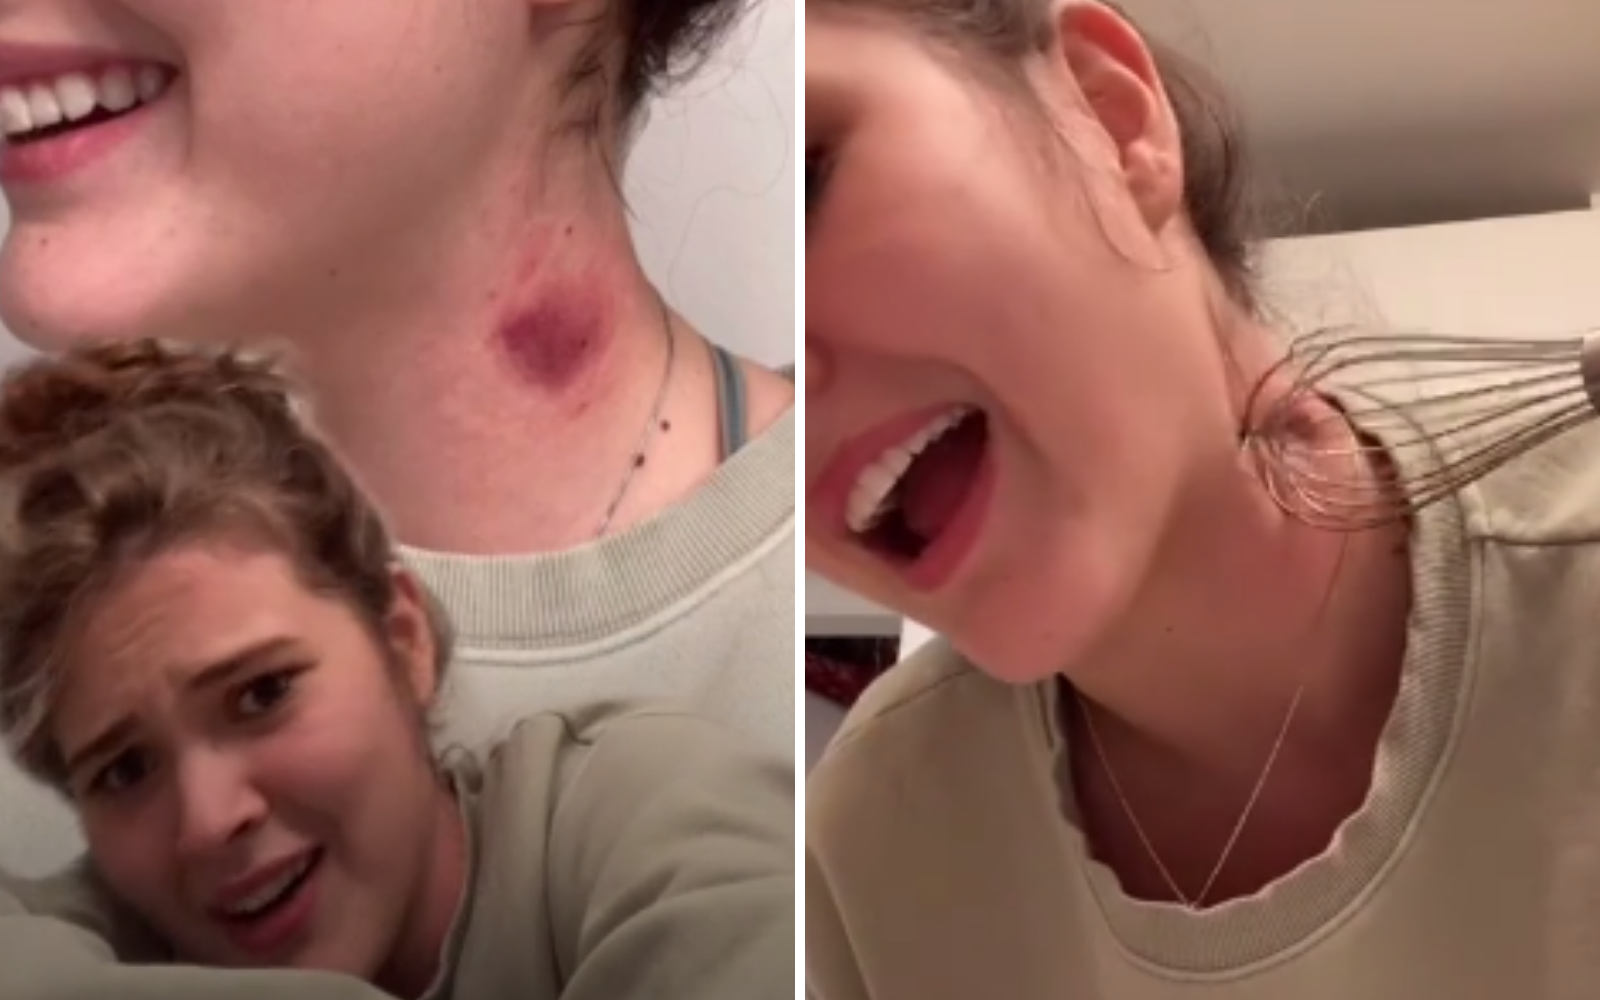 TikTok teens swear by kitchen whisks for getting rid of hickeys. But is it really effective?